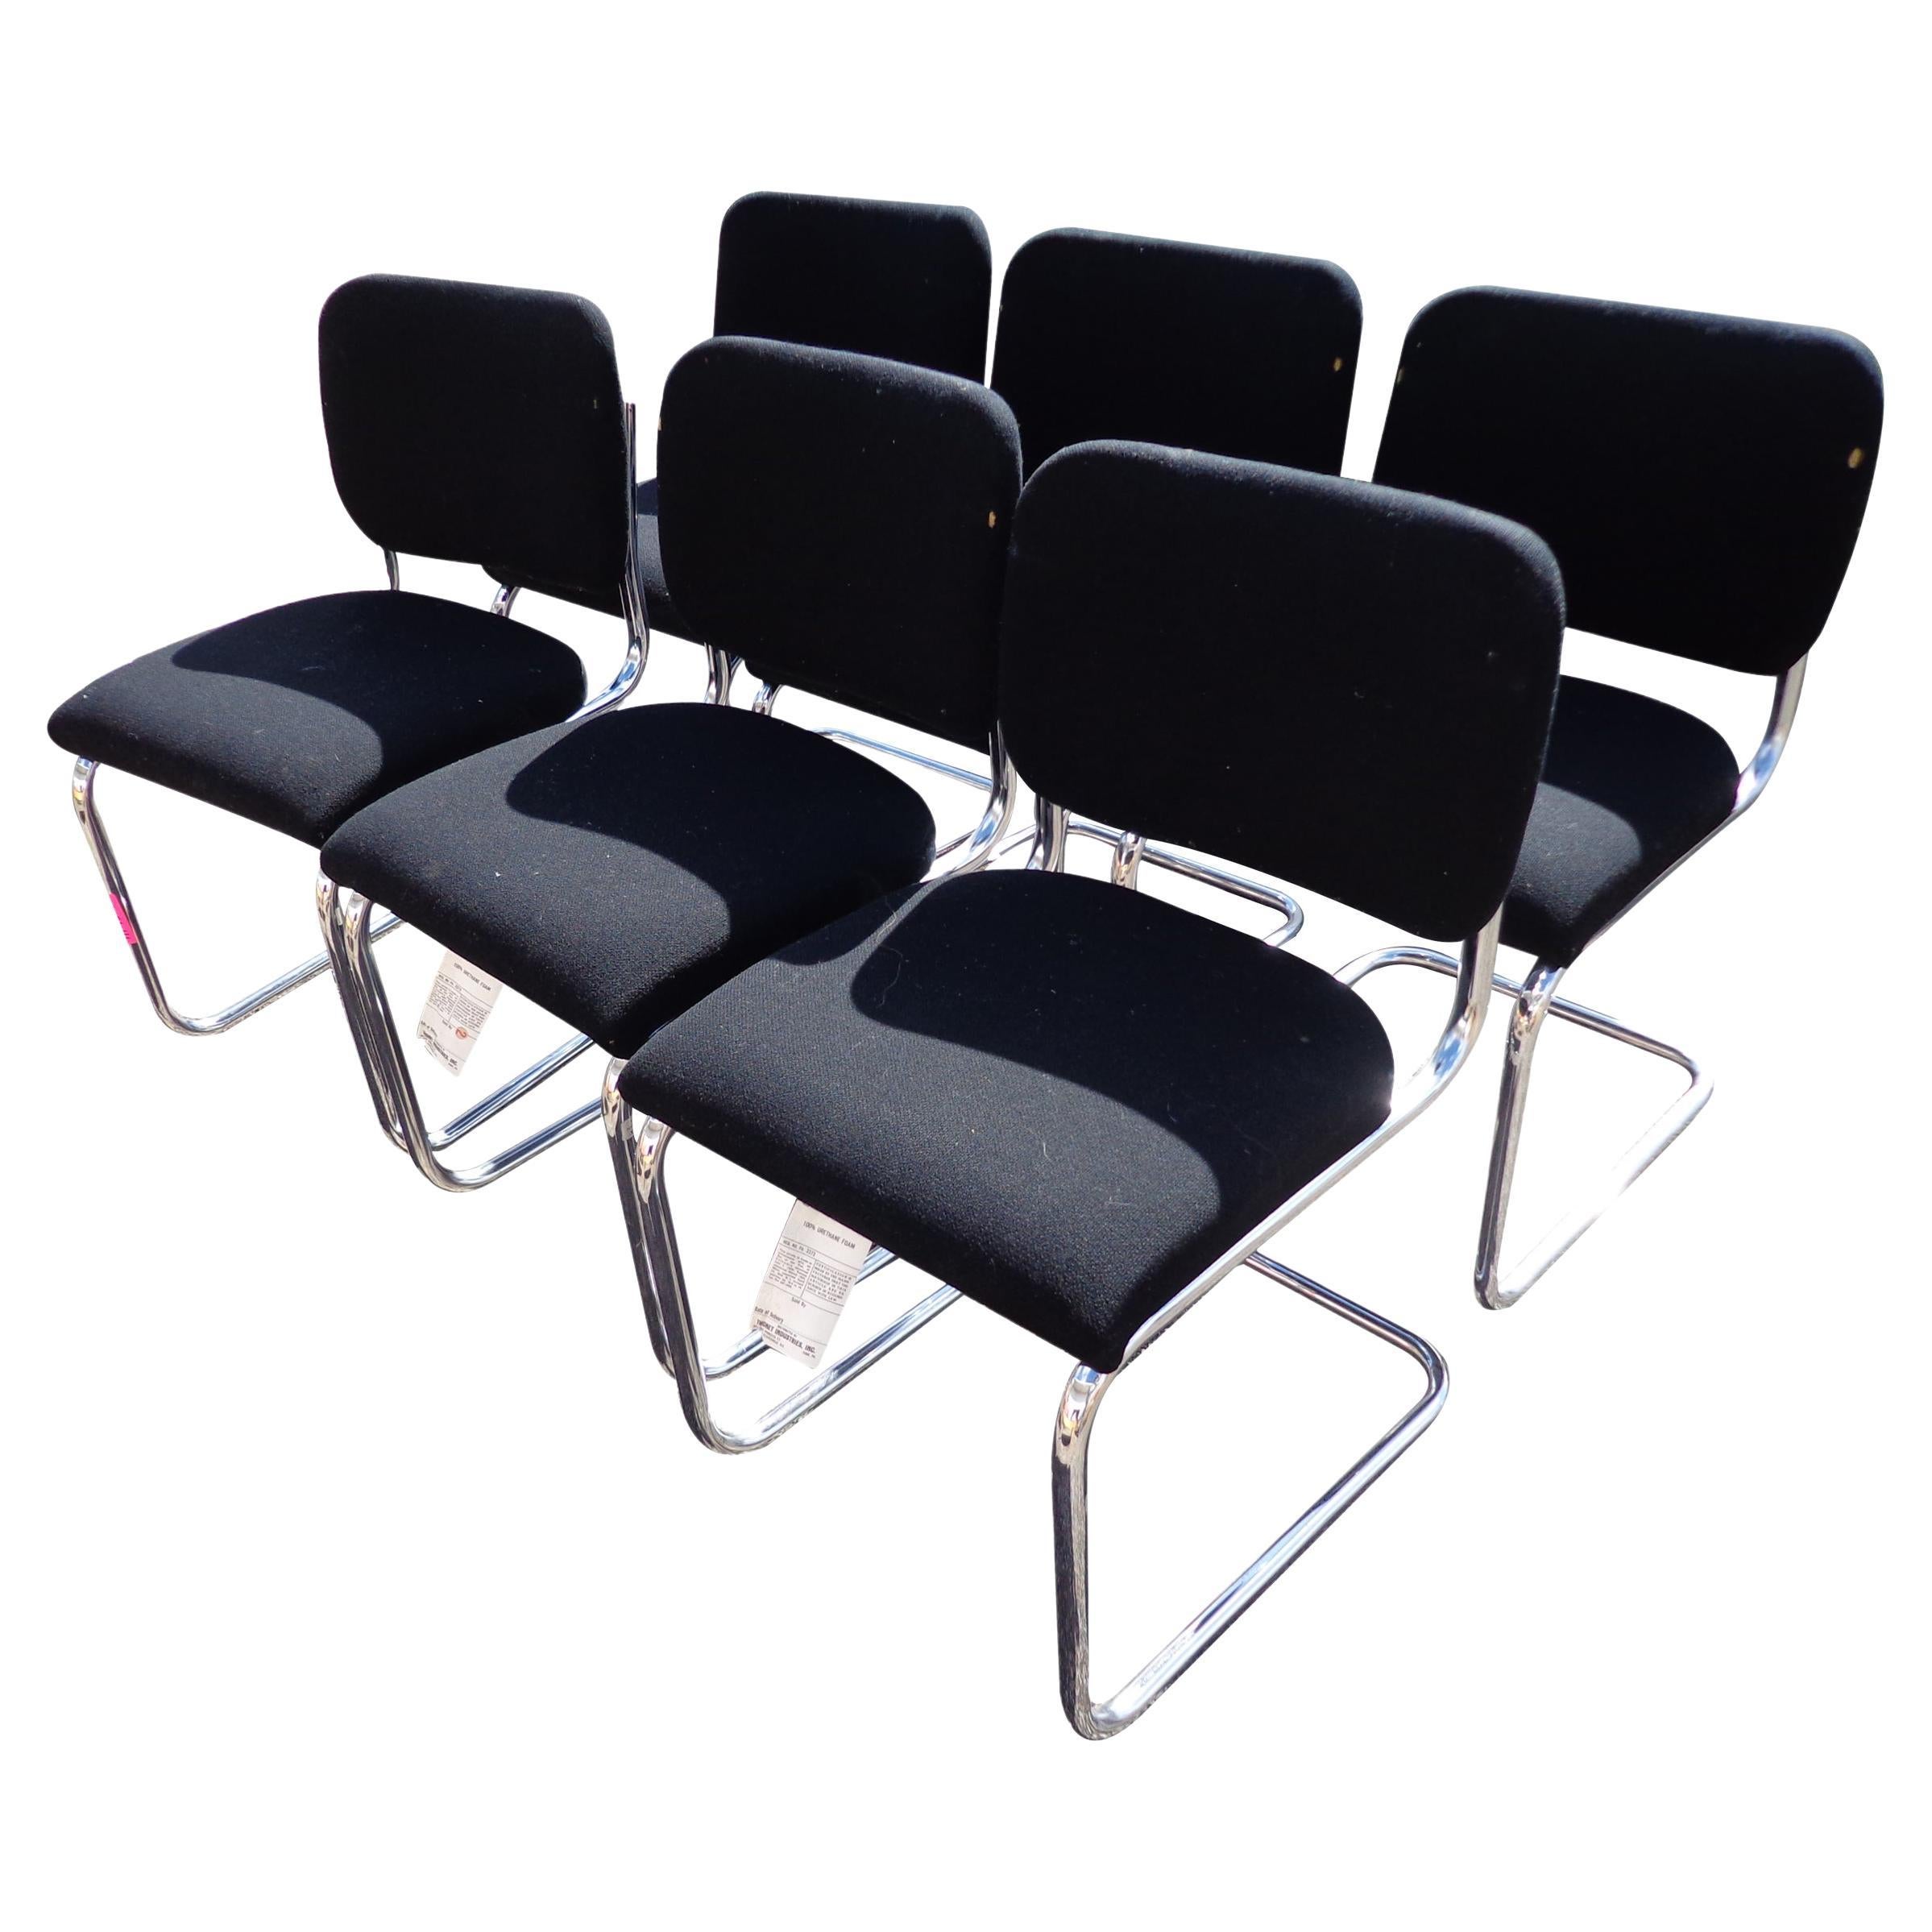 S 32 Cantilever Thonet side chair

S 32 Cantilever chair combines the tubular steel frame with leather upholstered seat and backrest for comfort.

Price for 1
6 available.